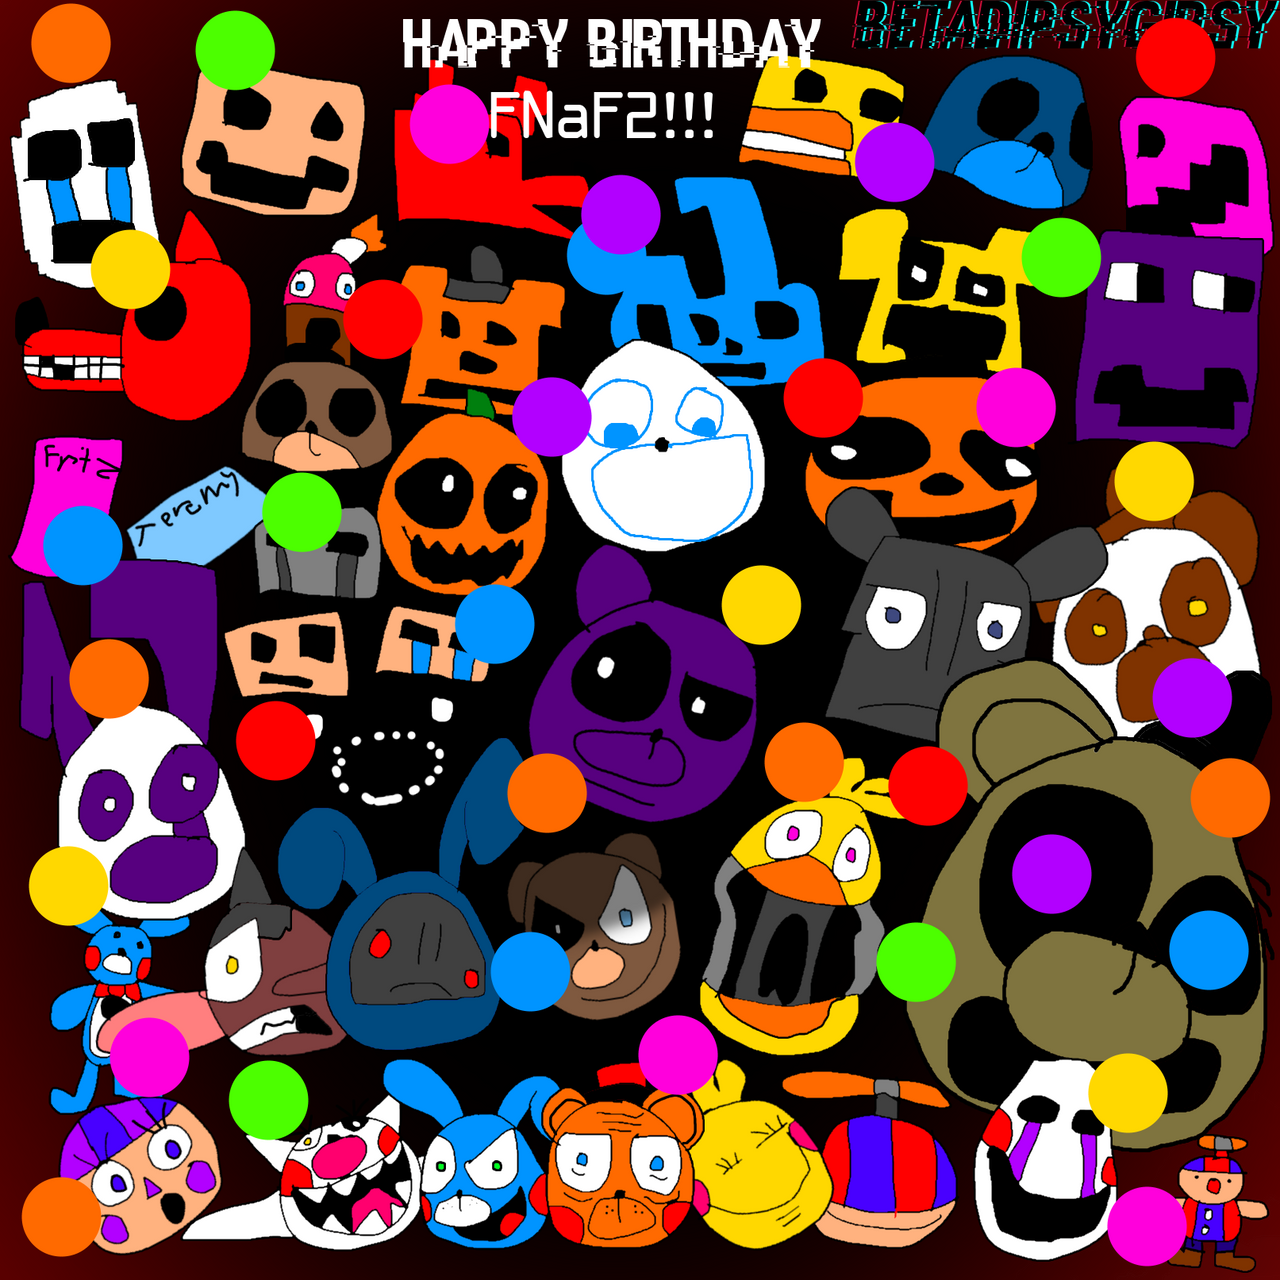 Five Nights At Freddy's 2 by Super-SpazCat on DeviantArt